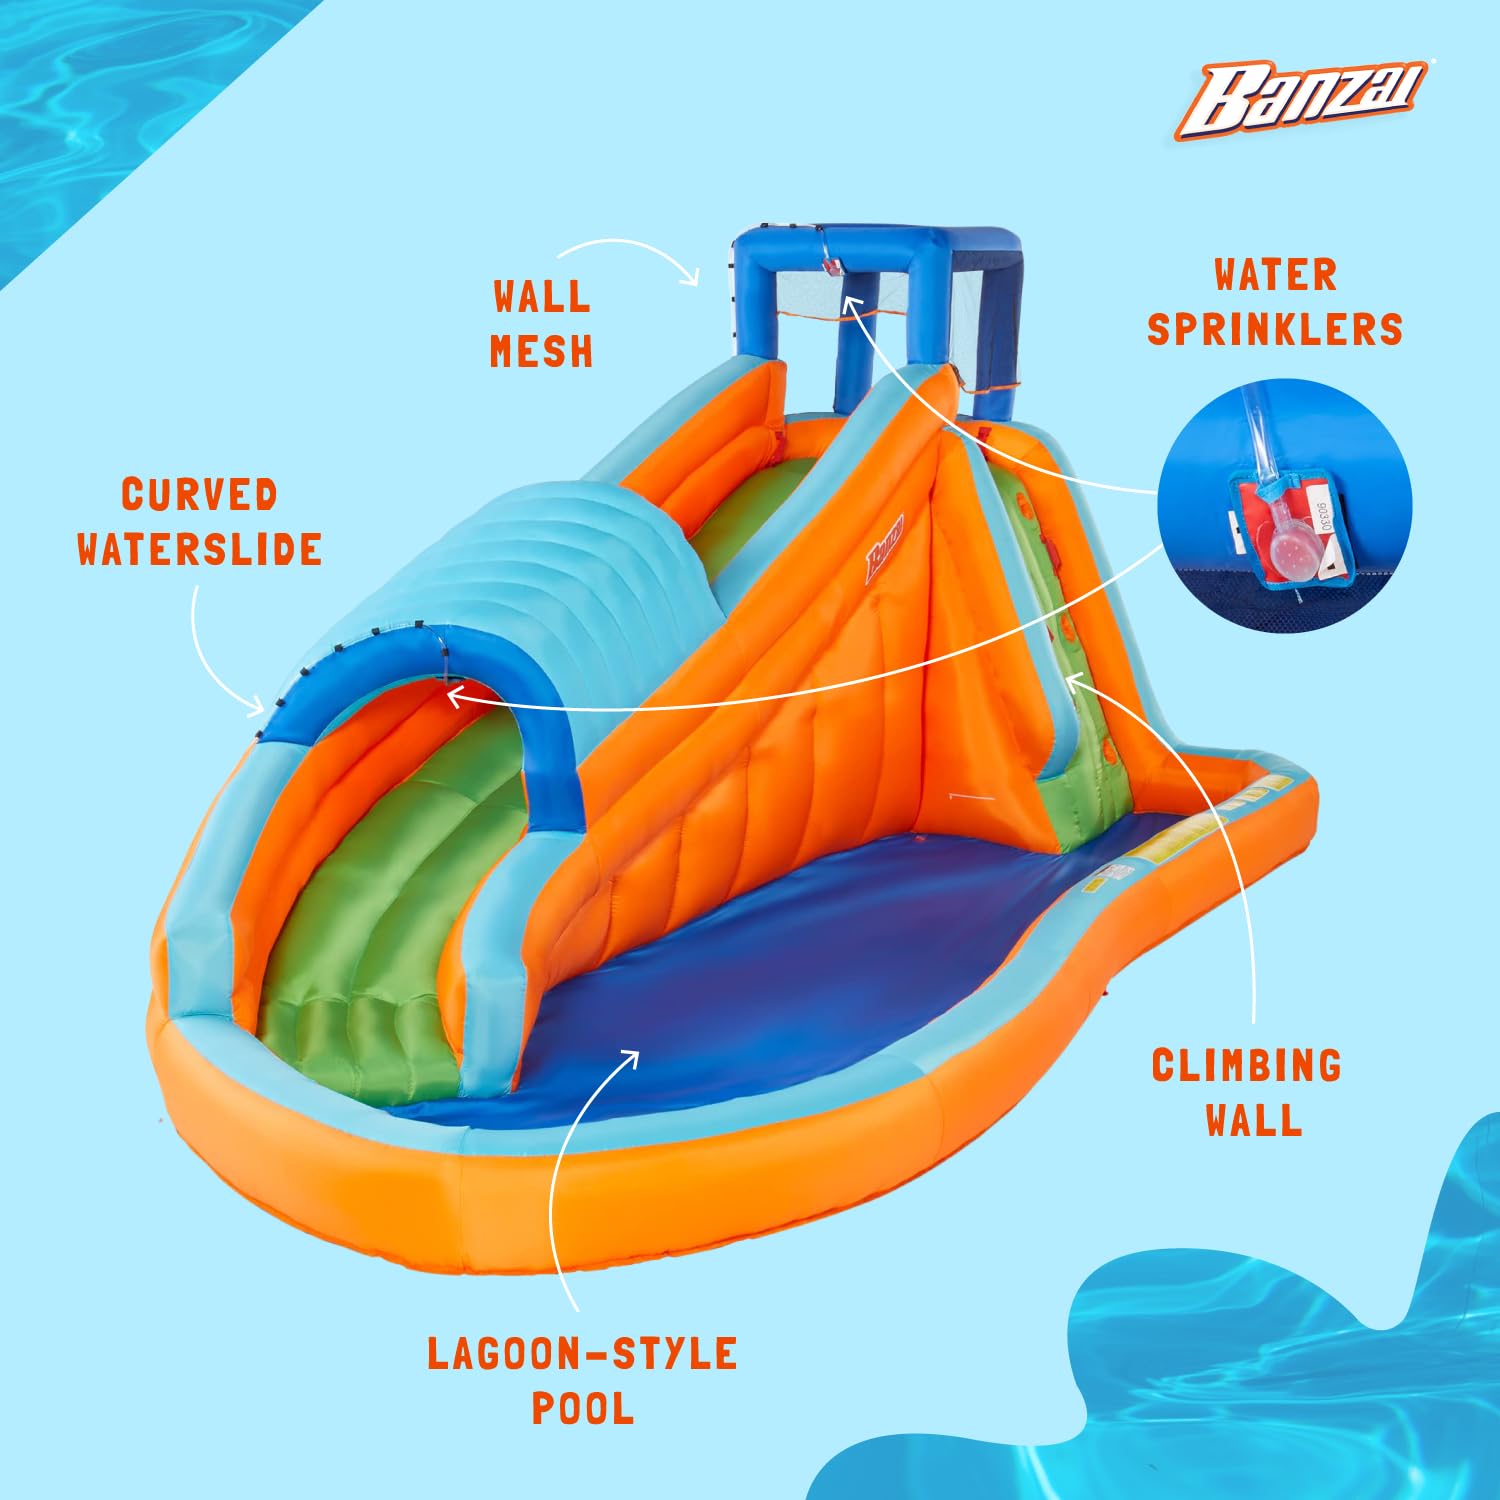 Banzai Surf Rider 17.5' L x 9.5' W x 7.9' H Inflatable Water Park with Waterslide, Pool, and Sprinklers